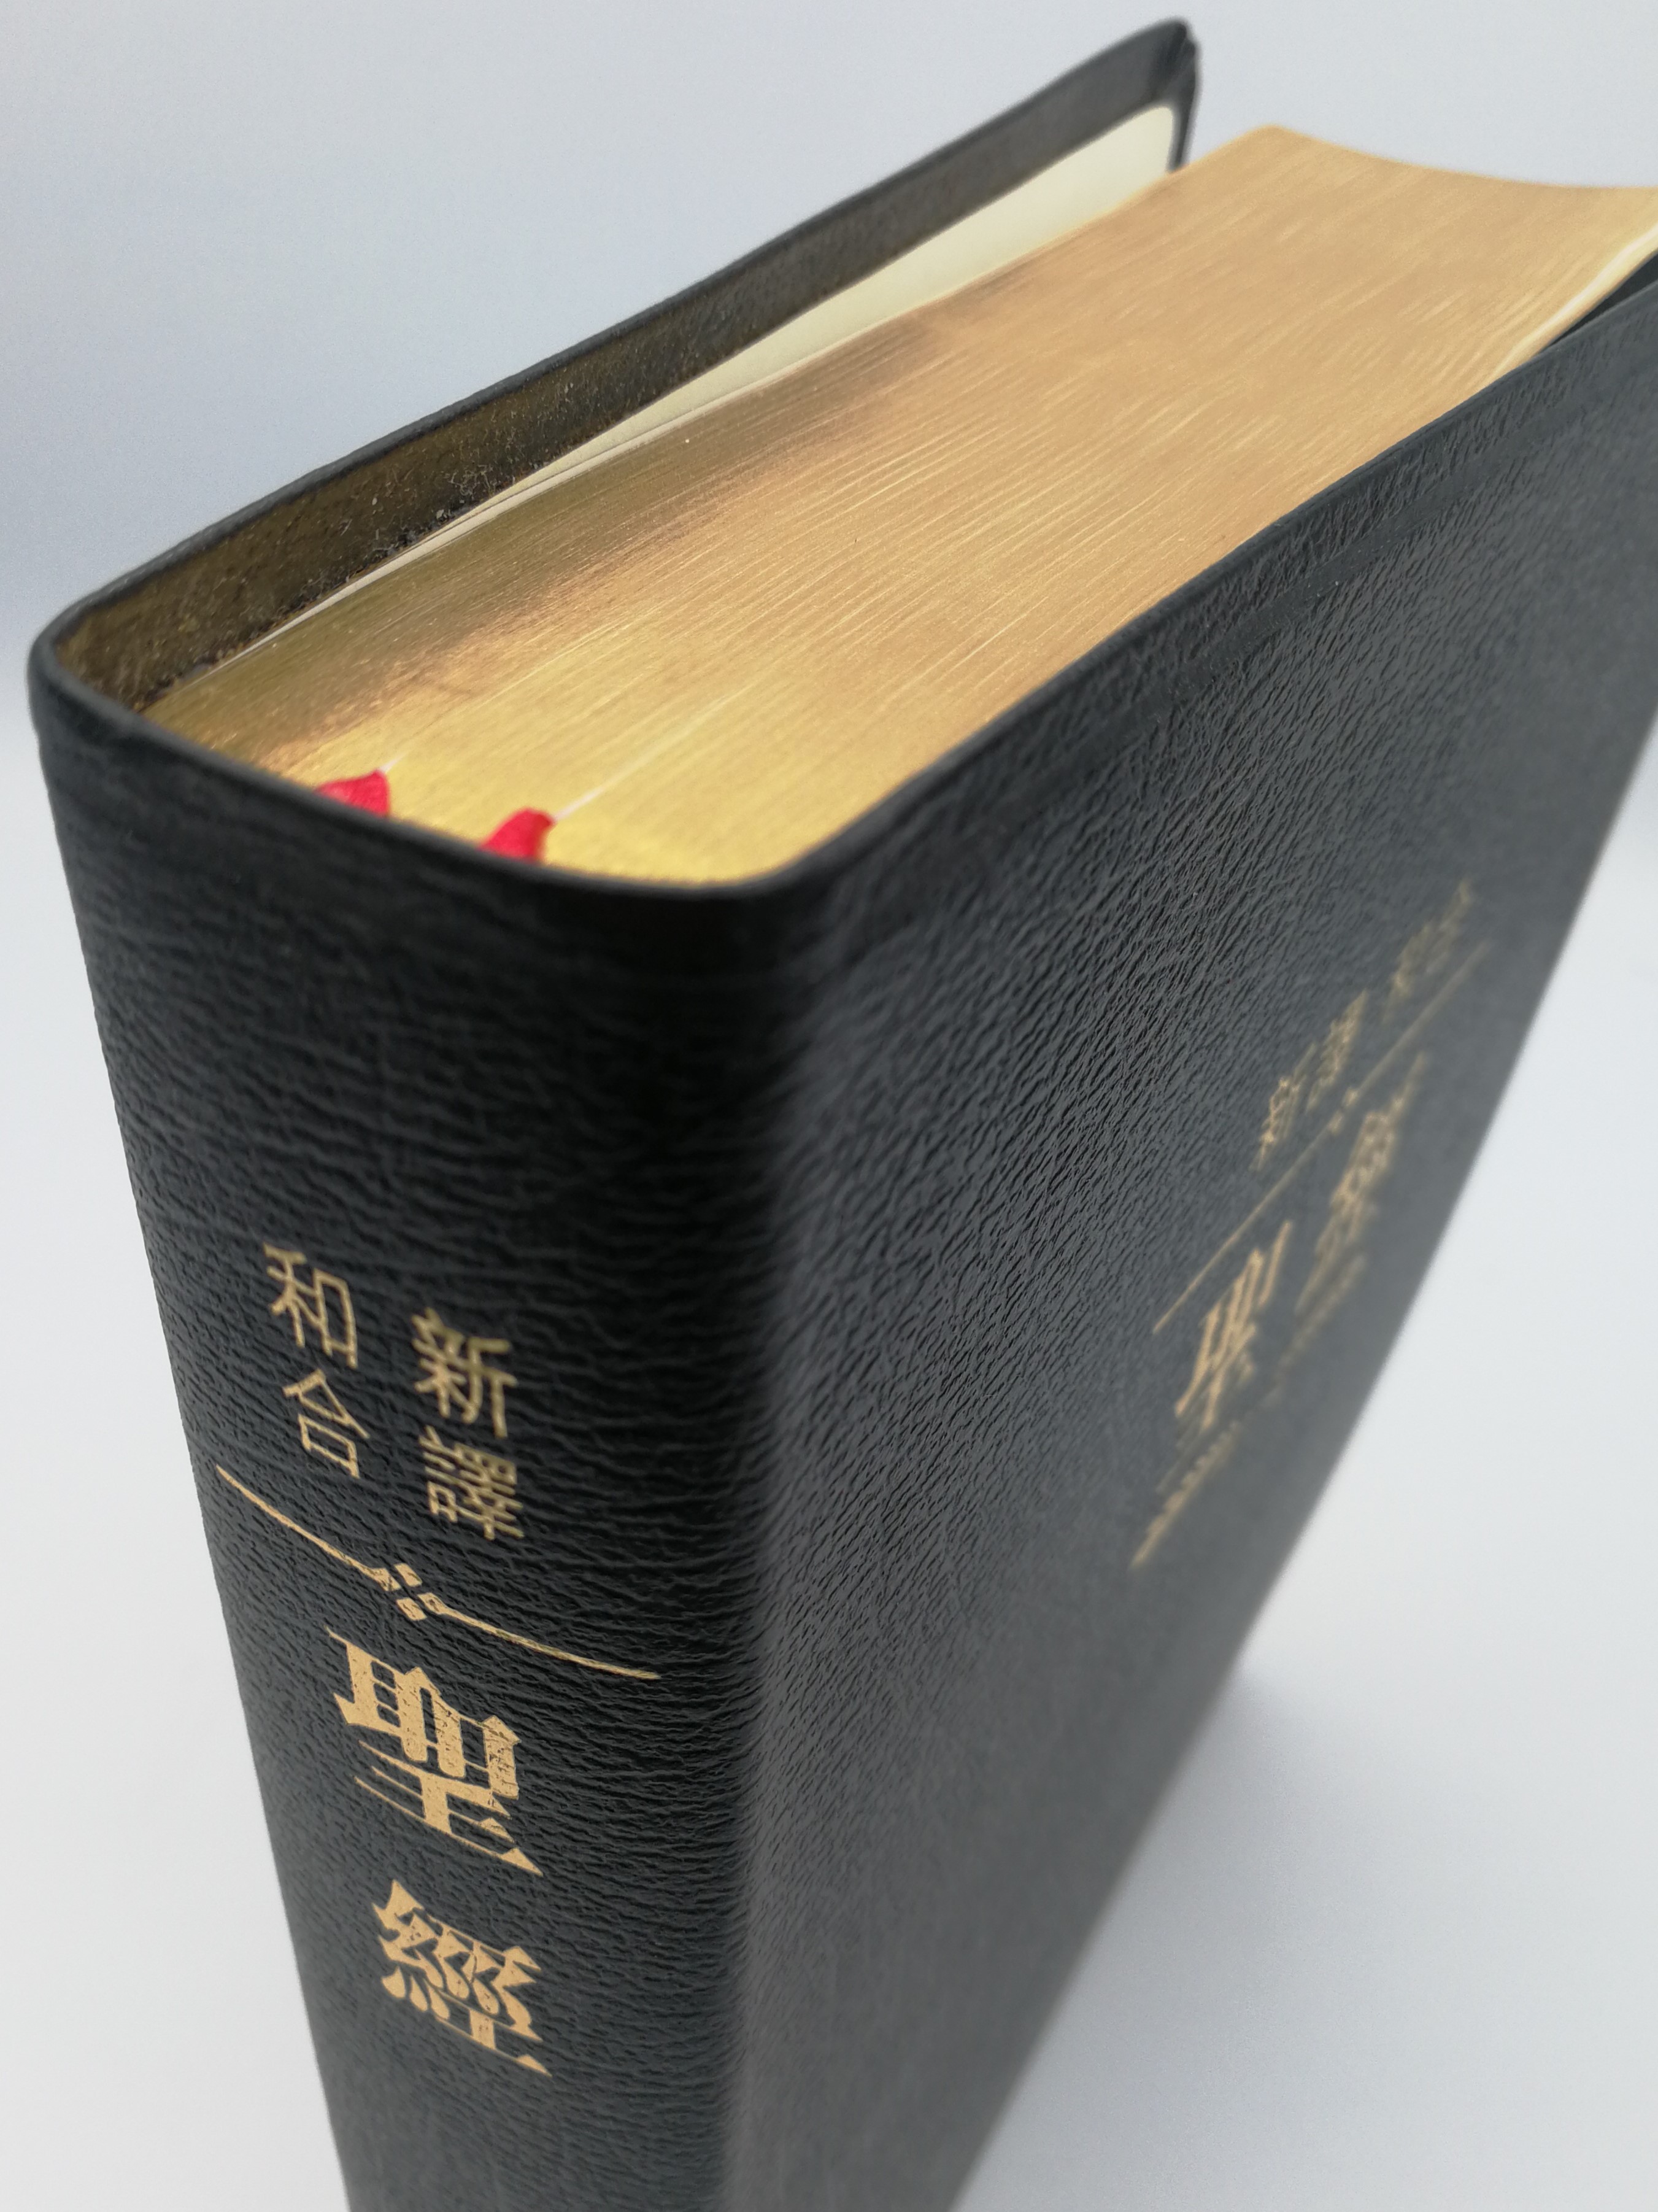 1-black-leather-new-chinese-version-parallel-chinese-union-version-bible-ncv-cuv-bible-2-.jpg